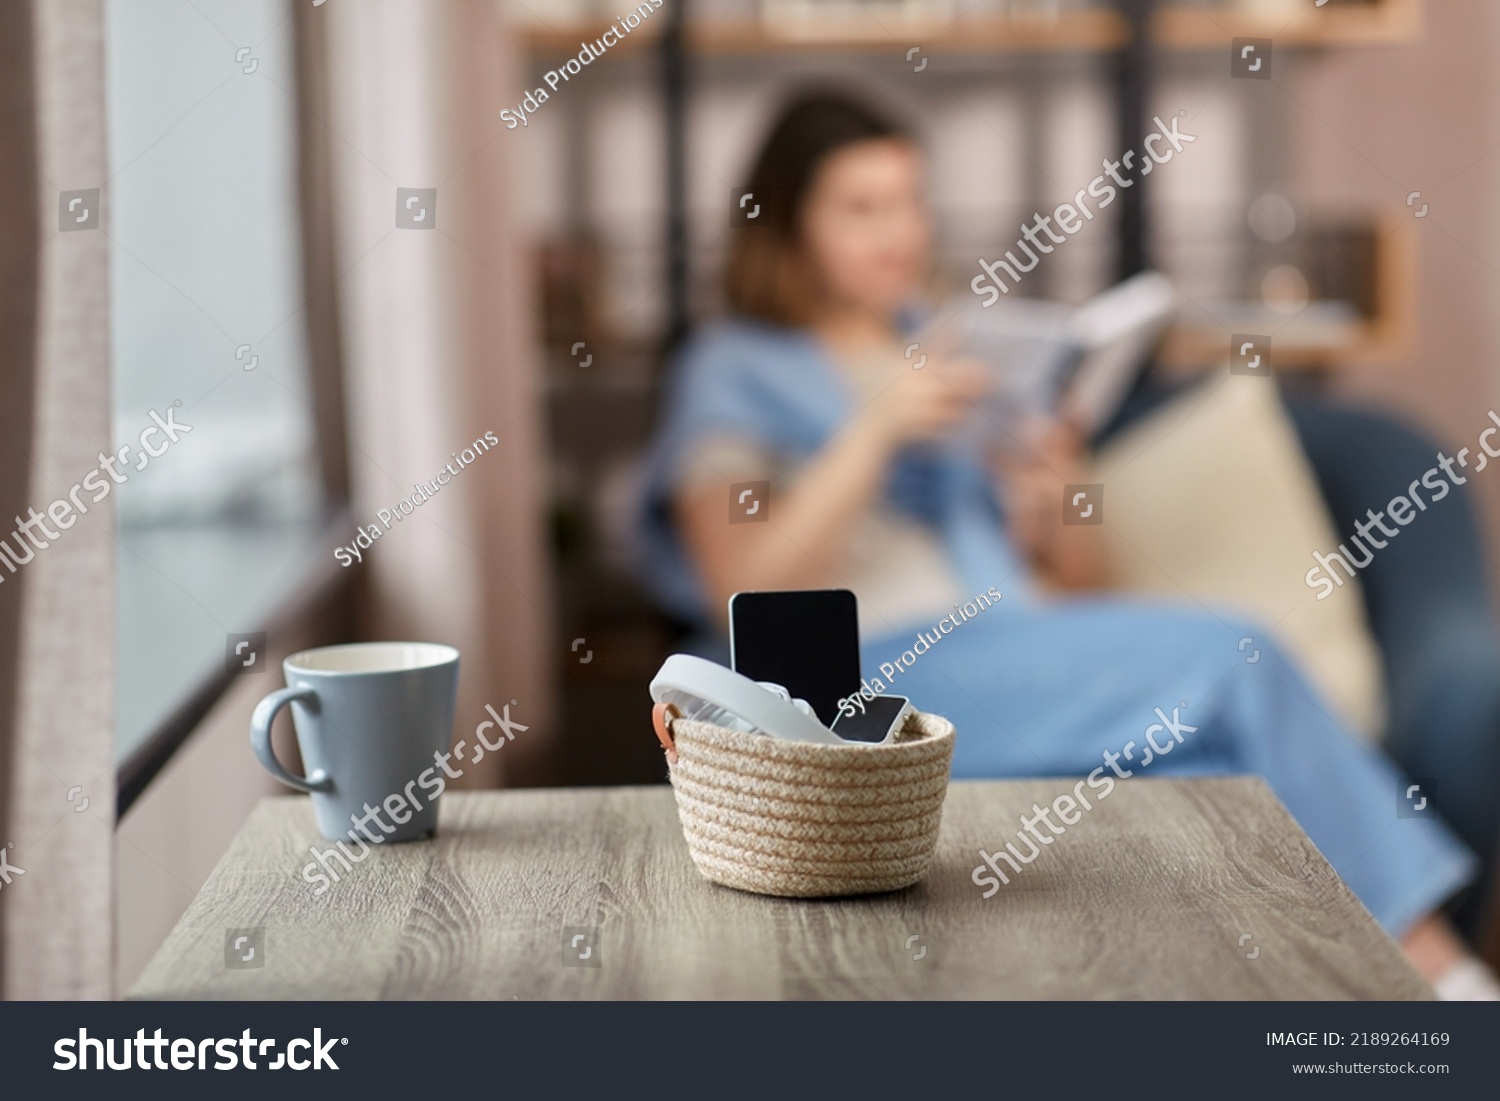 digital detox and leisure concept - close up of gadgets in basket on table and woman reading book at home #2189264169